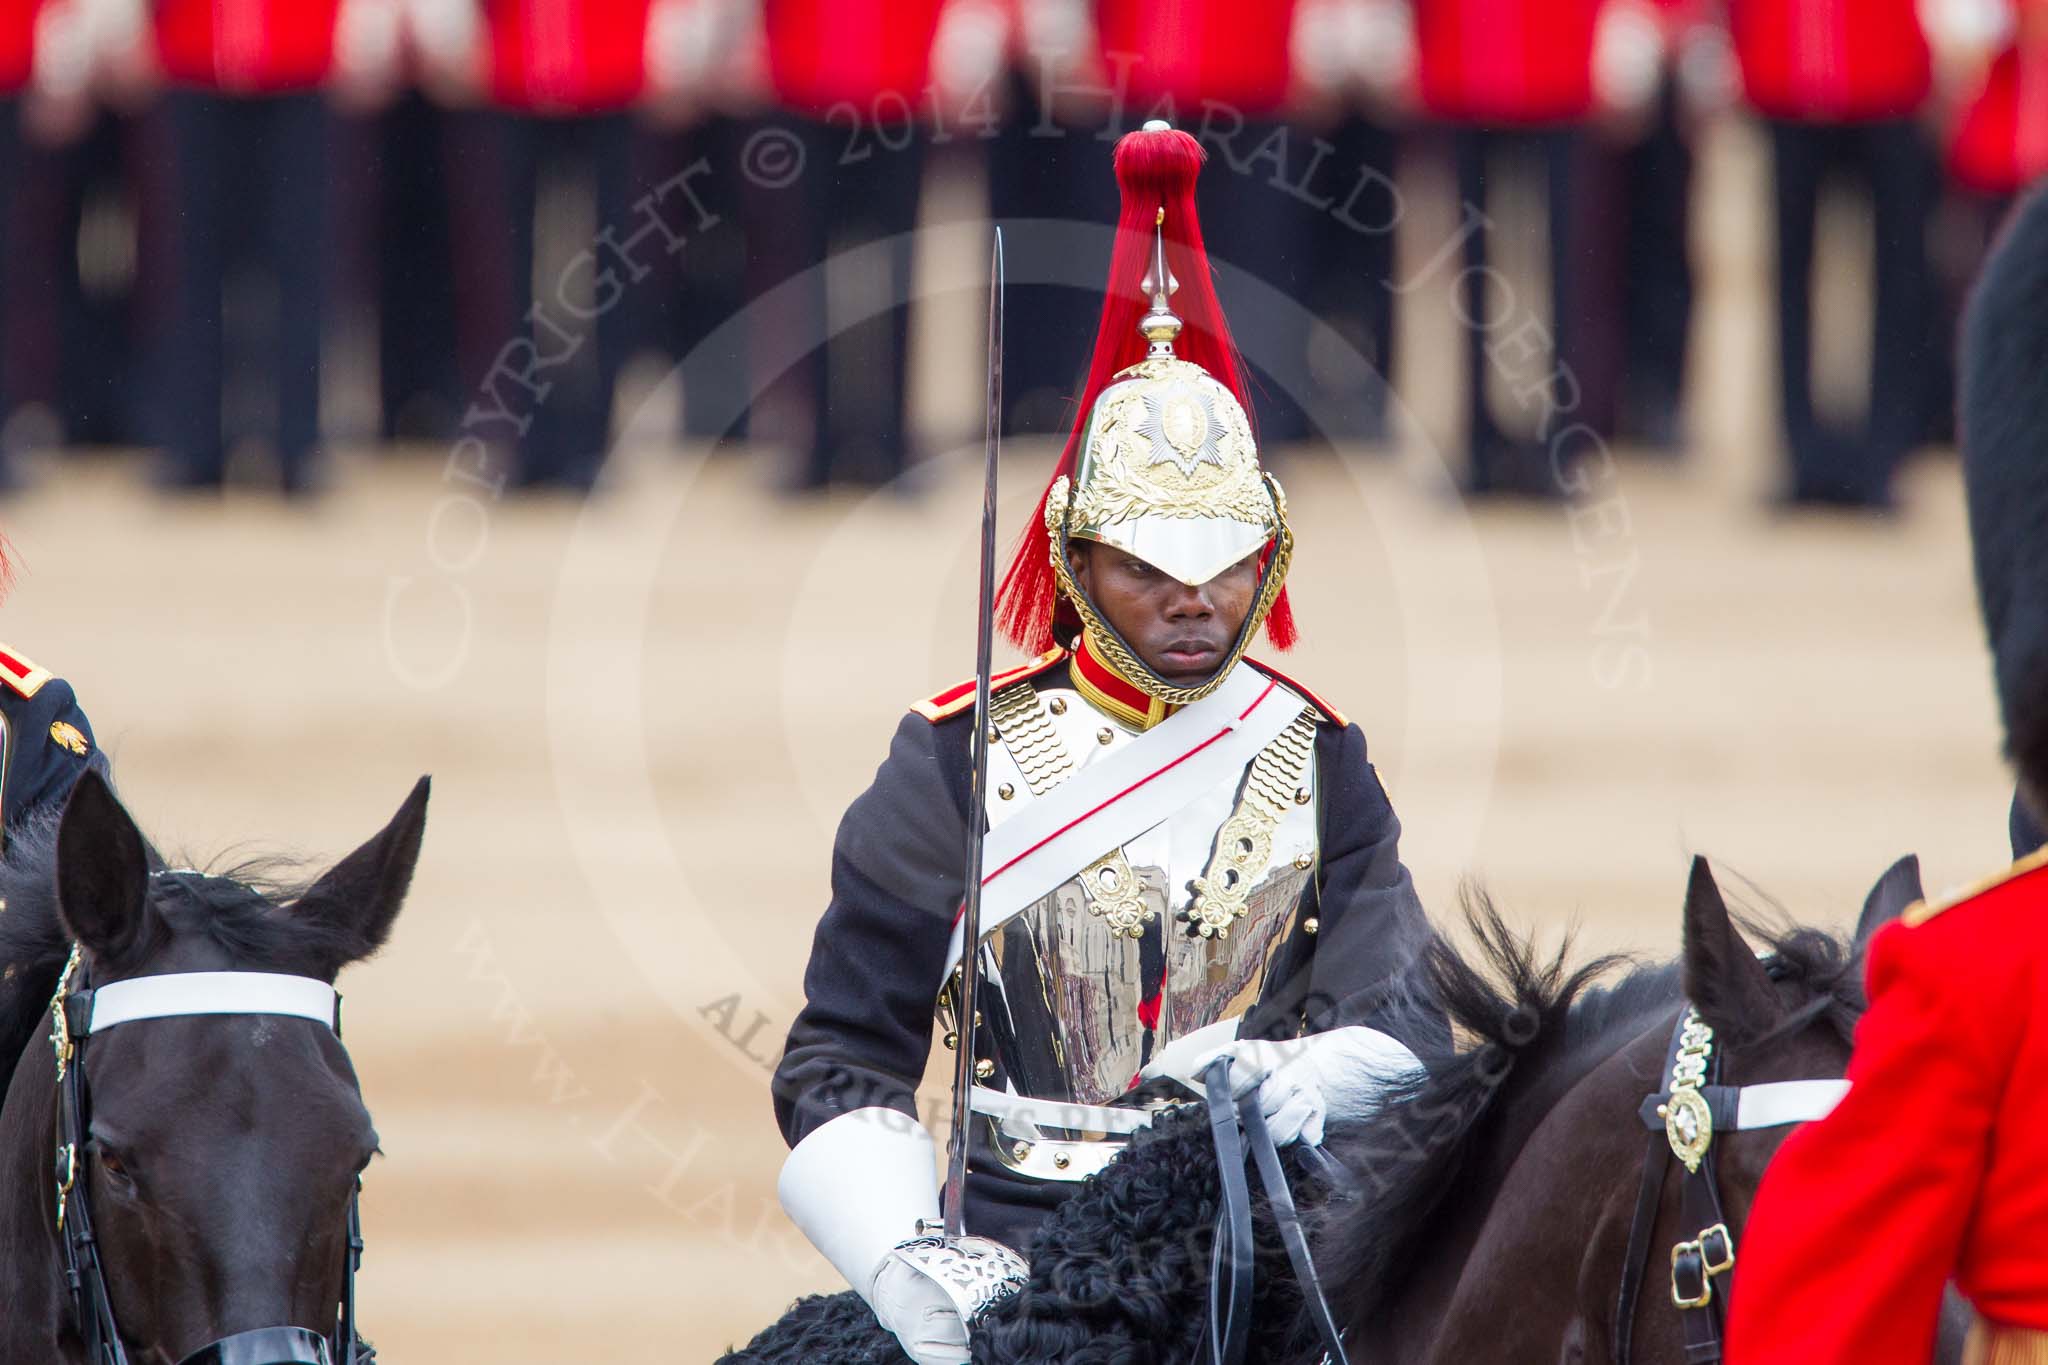 Trooping the Colour 2014.
Horse Guards Parade, Westminster,
London SW1A,

United Kingdom,
on 14 June 2014 at 11:07, image #428